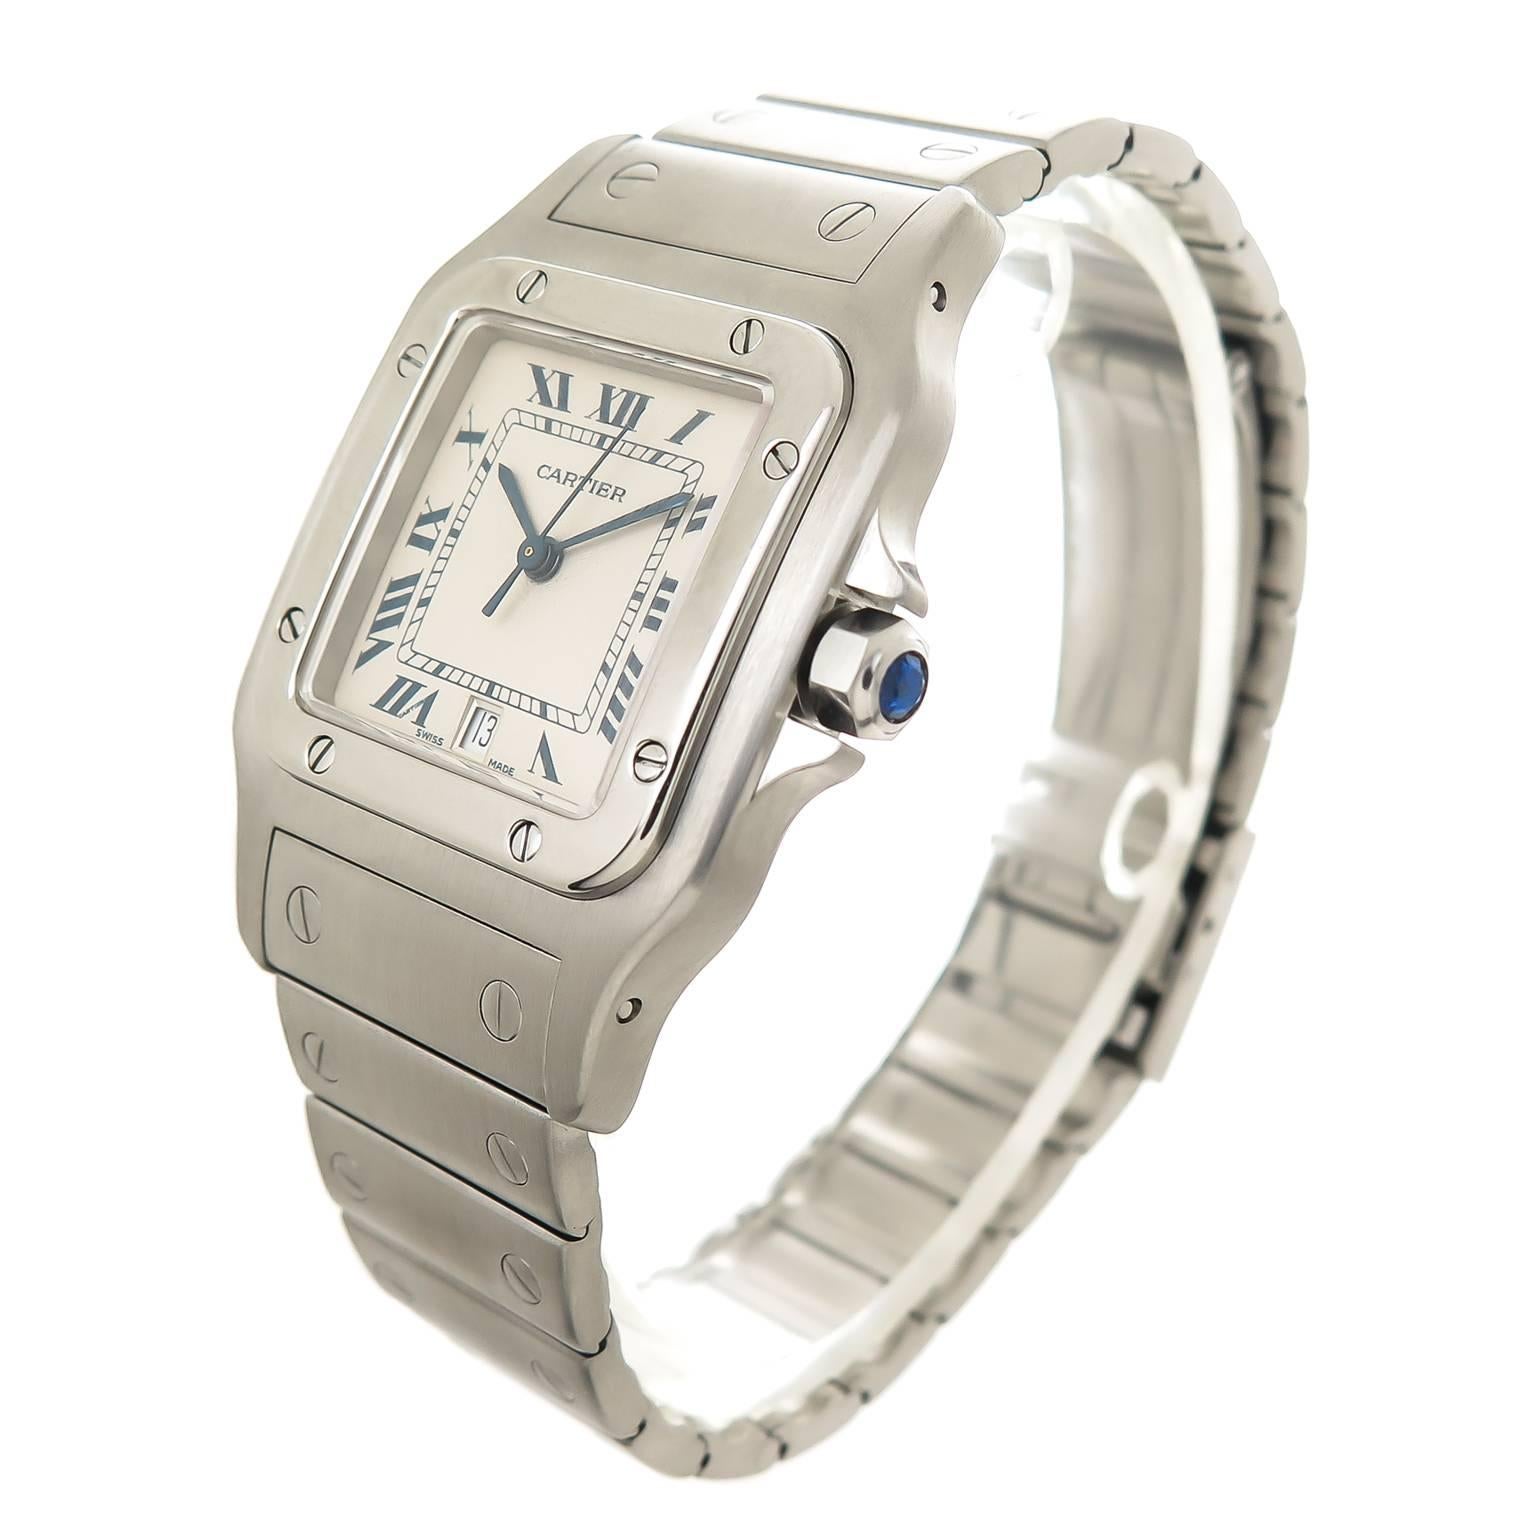 Circa 2005 Cartier Santos, 41 X 29 MM Stainless Steel water resistant case, Matt finish with high polished Bezel, quartz Movement, White Dial with Black Roman Numerals, sweep seconds hand, Calendar window at the 6, scratch resistant crystal and a